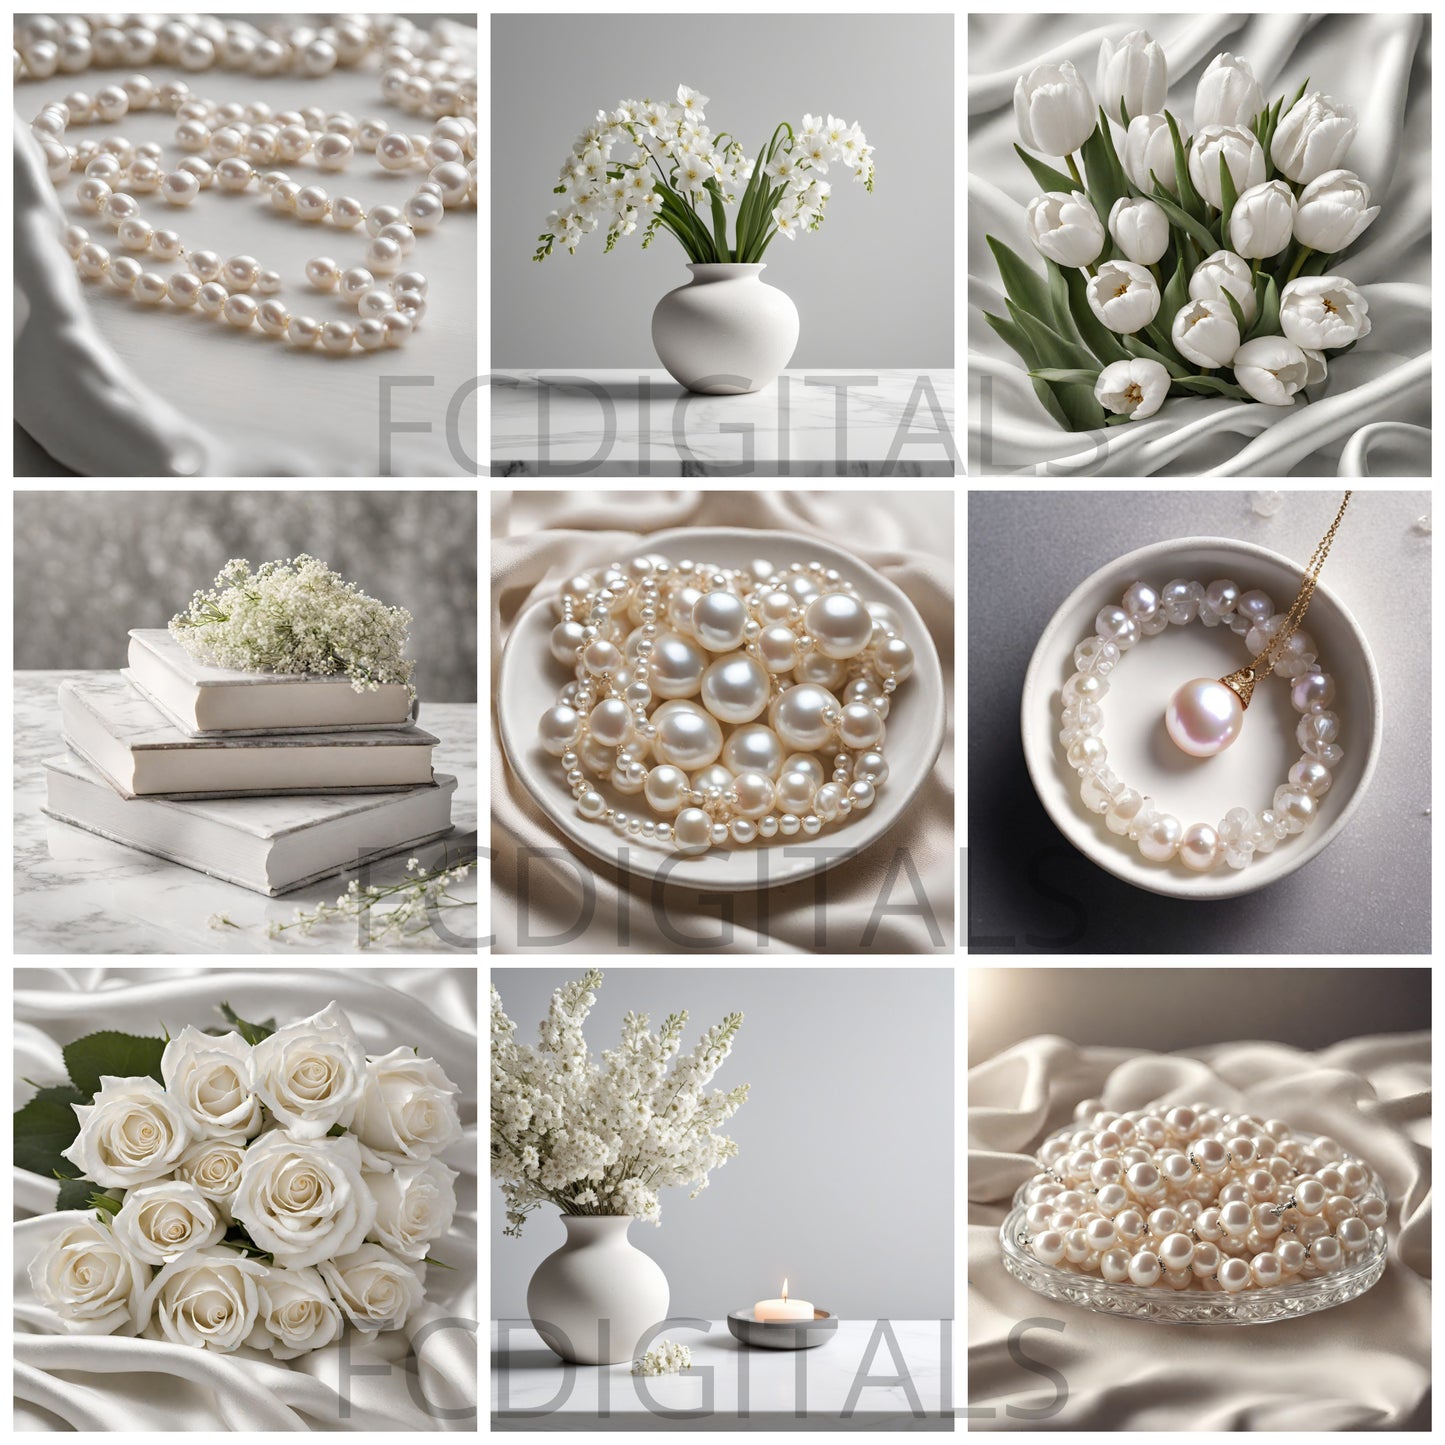 56 White Aesthetic Stock Images with Master Resell Rights, Elegant White Pearl Stock Photos, Faceless Digital Marketing, Done For You